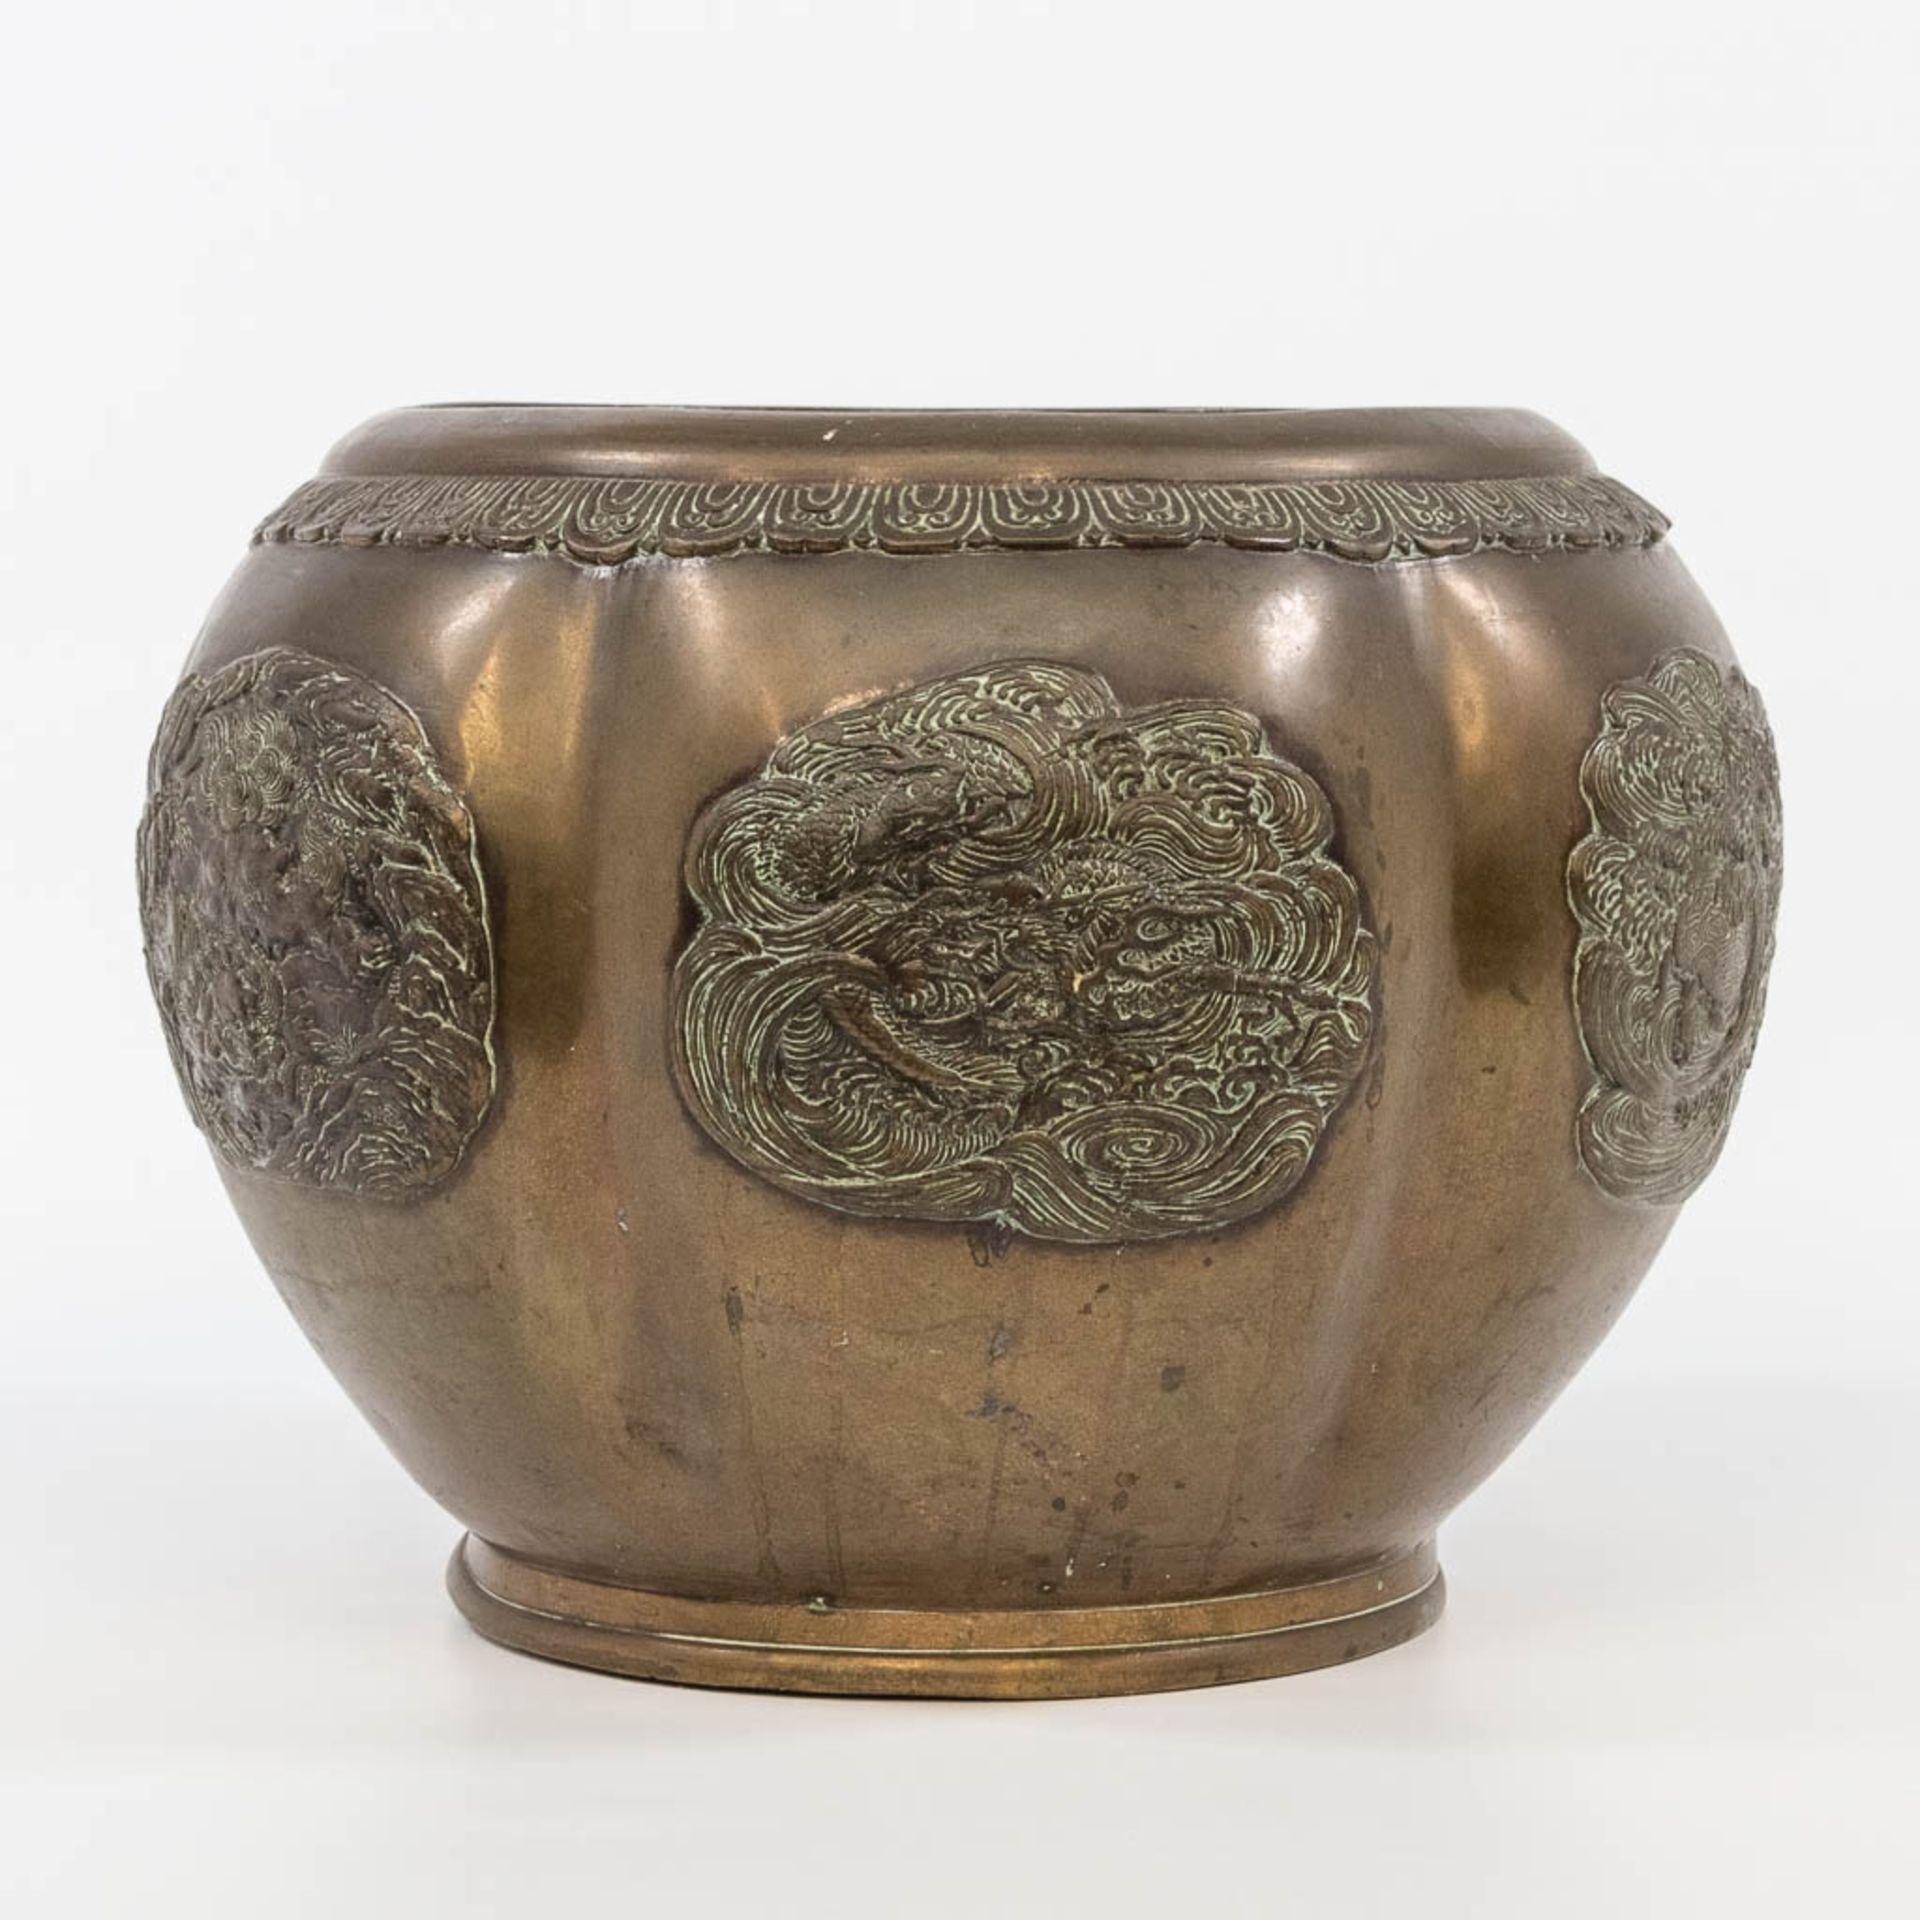 A Japanese bronze planter from the Meji period, 19th century. (23 x 32 cm)